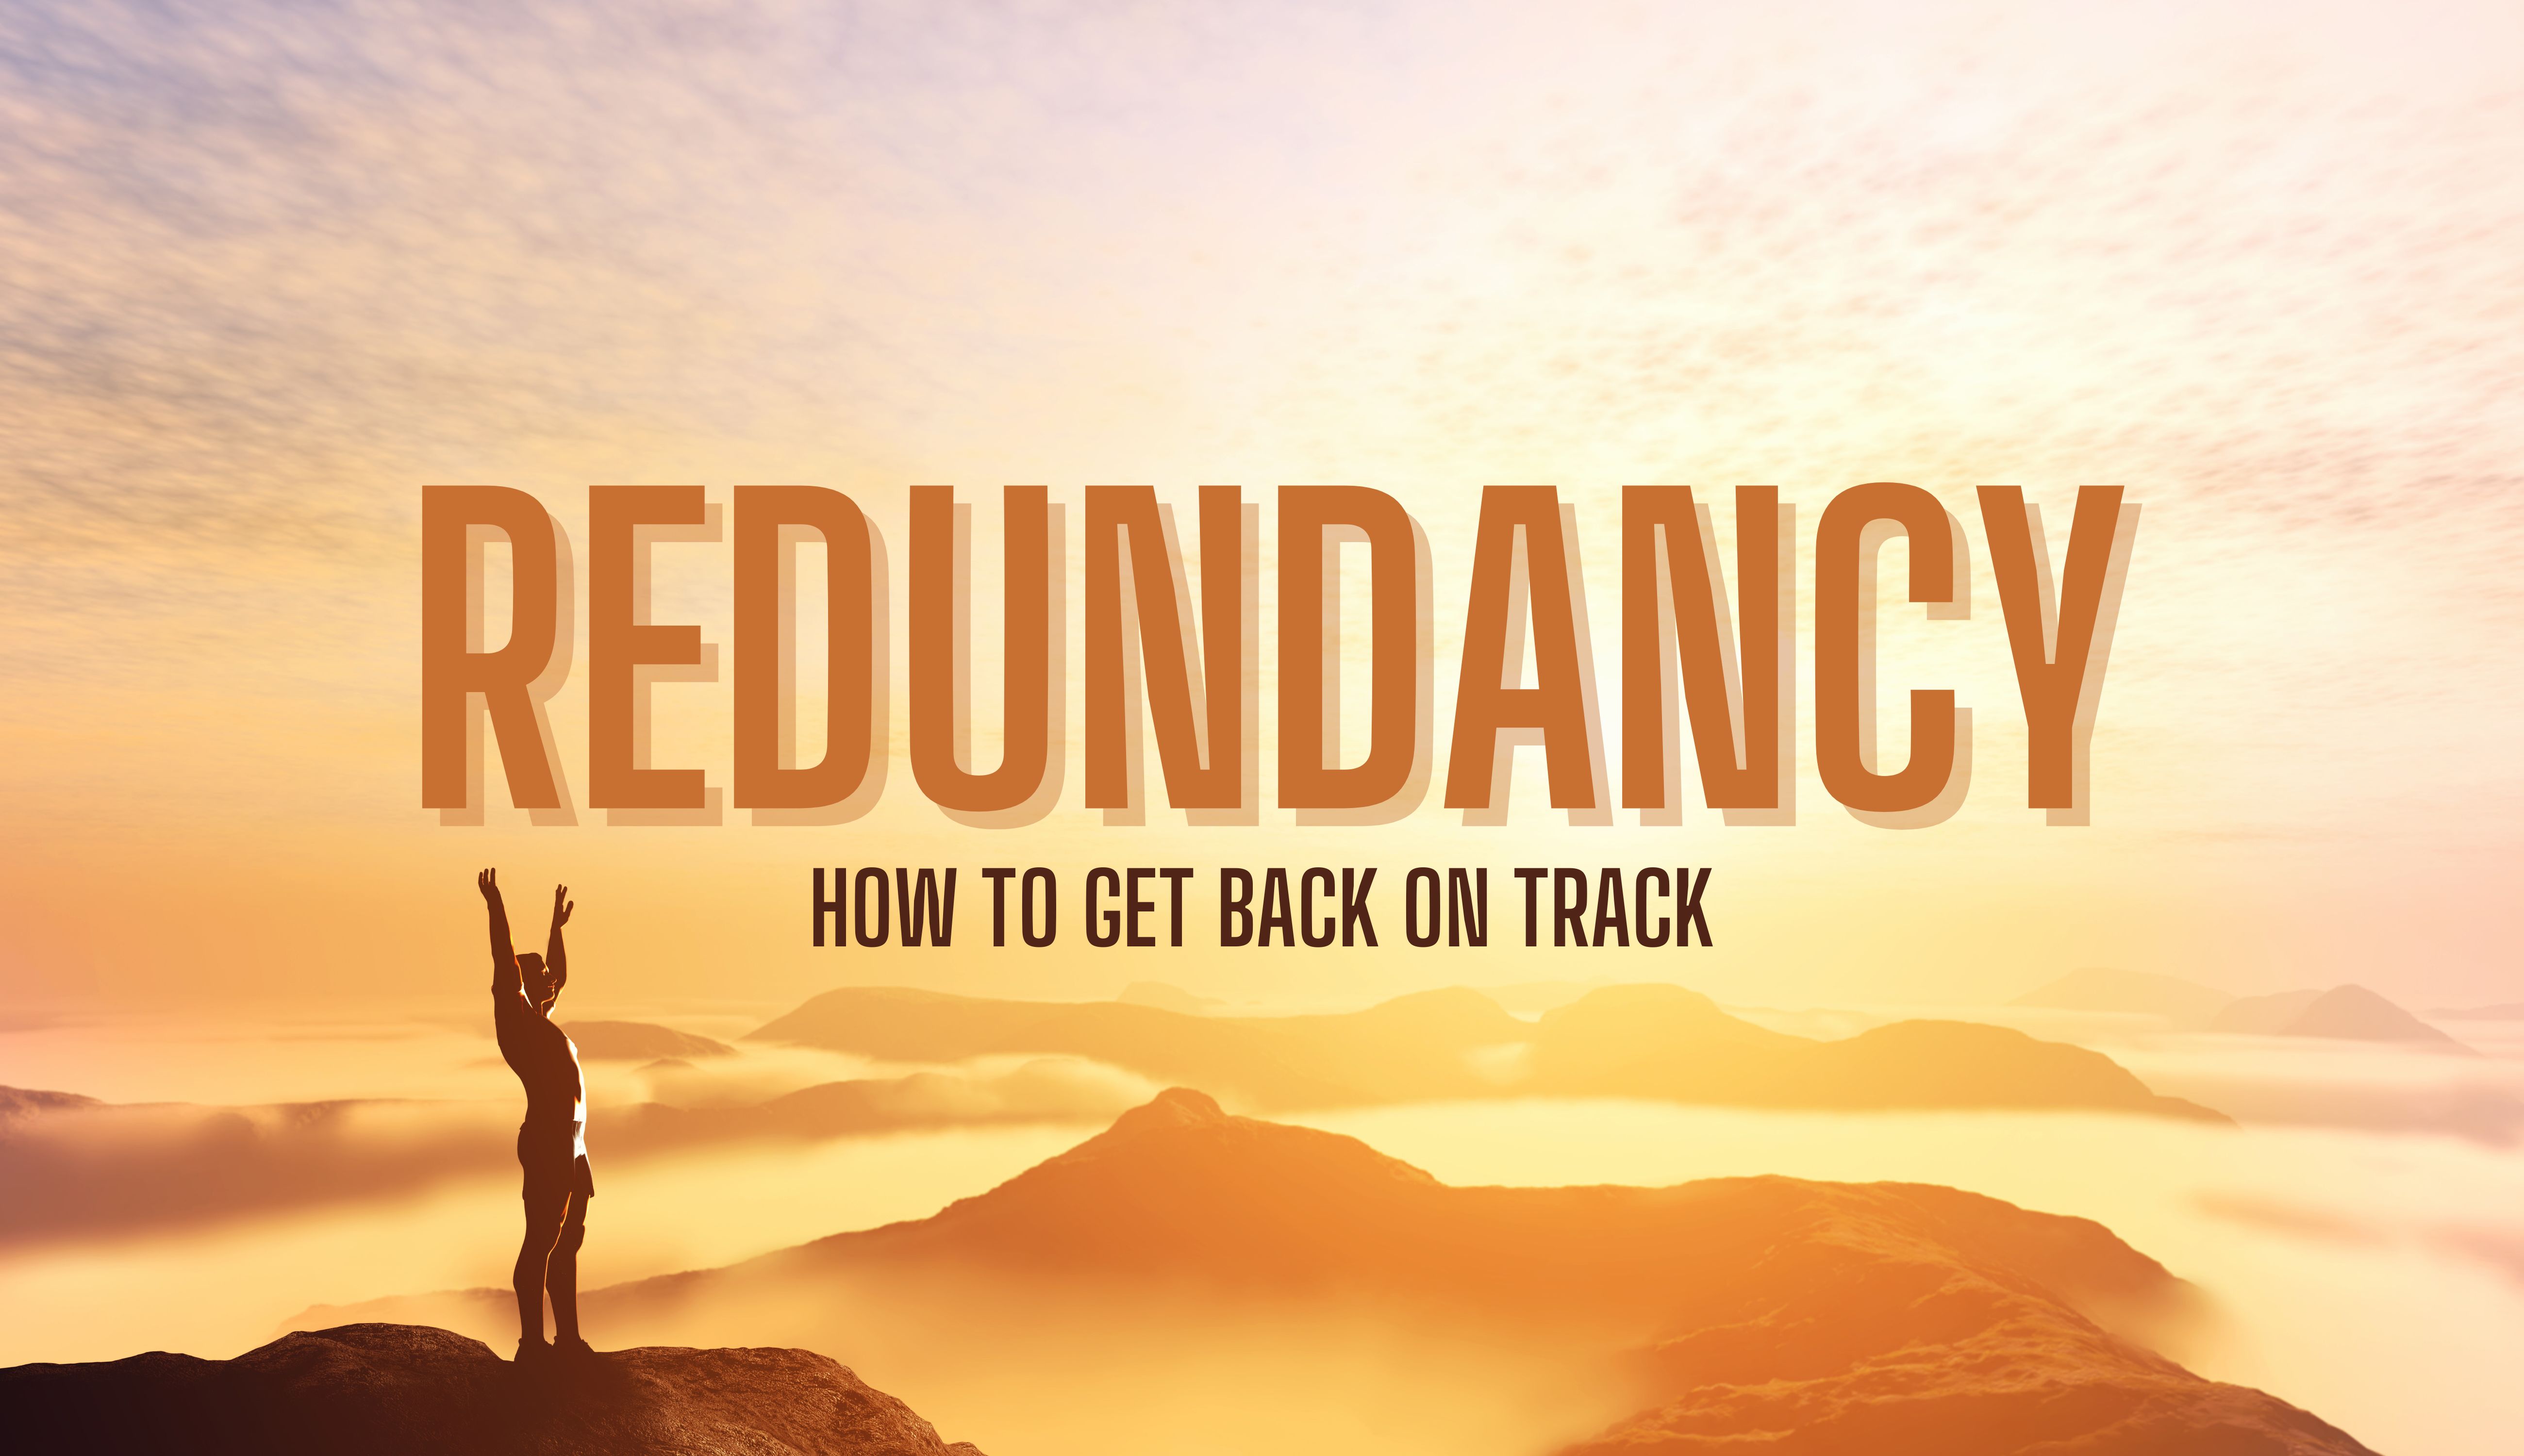 Redundancy: How to Get Back on Track